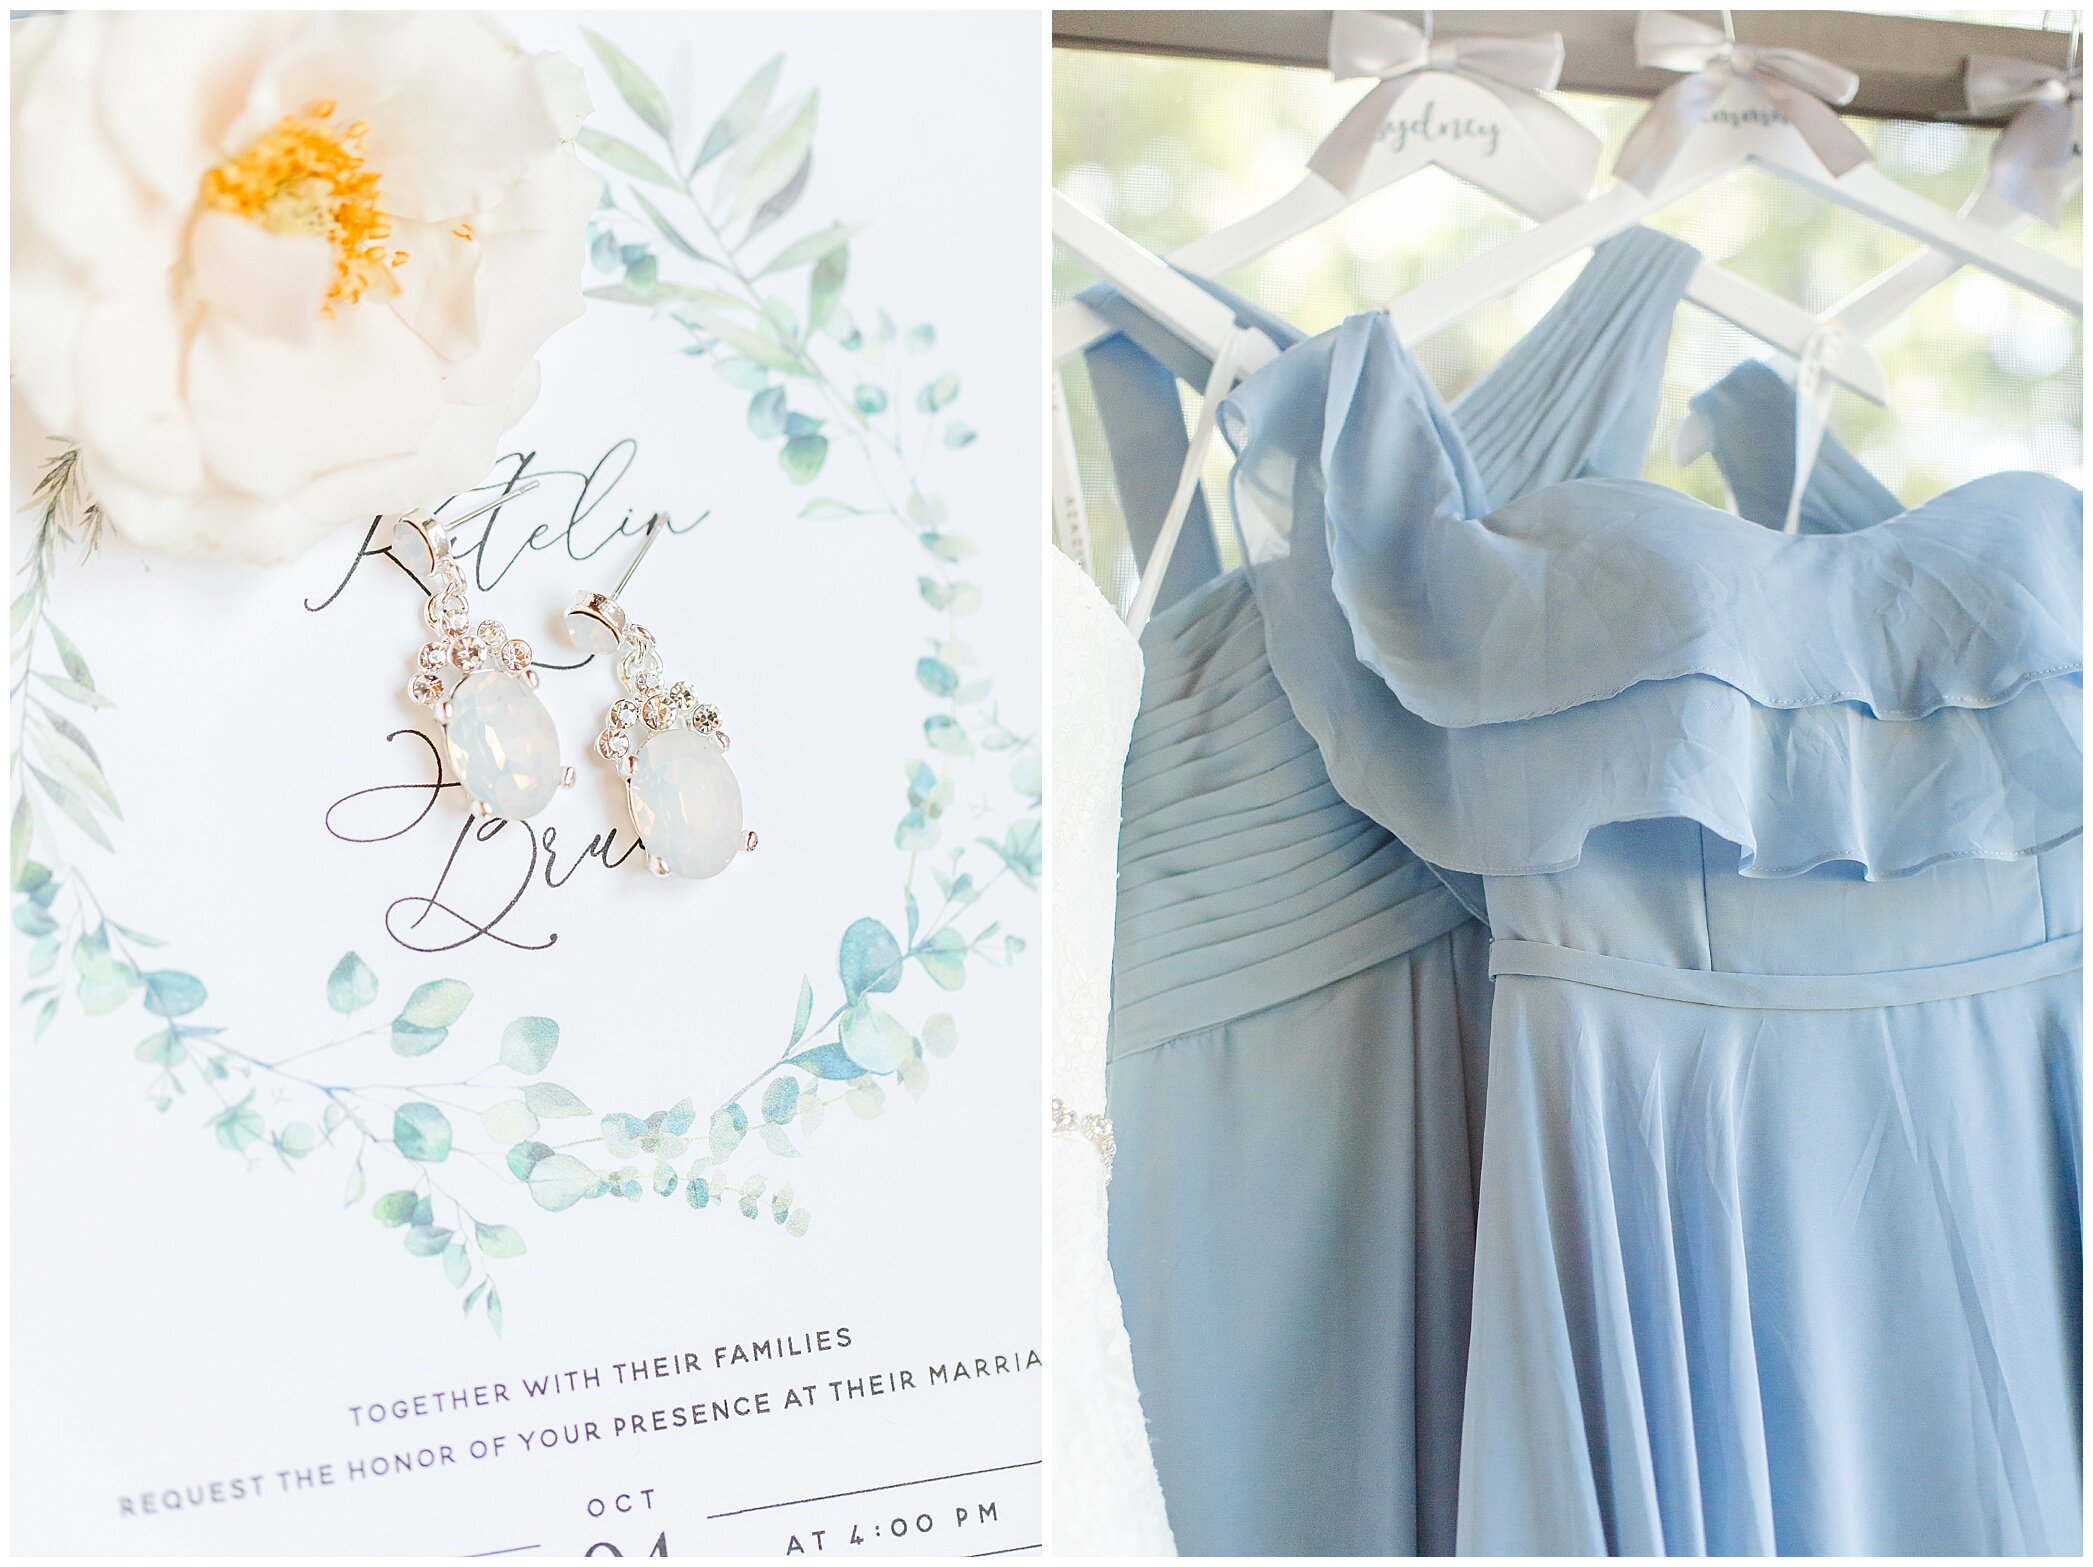  How gorgeous were Katie’s details?!? Loved the soft colors so much! 